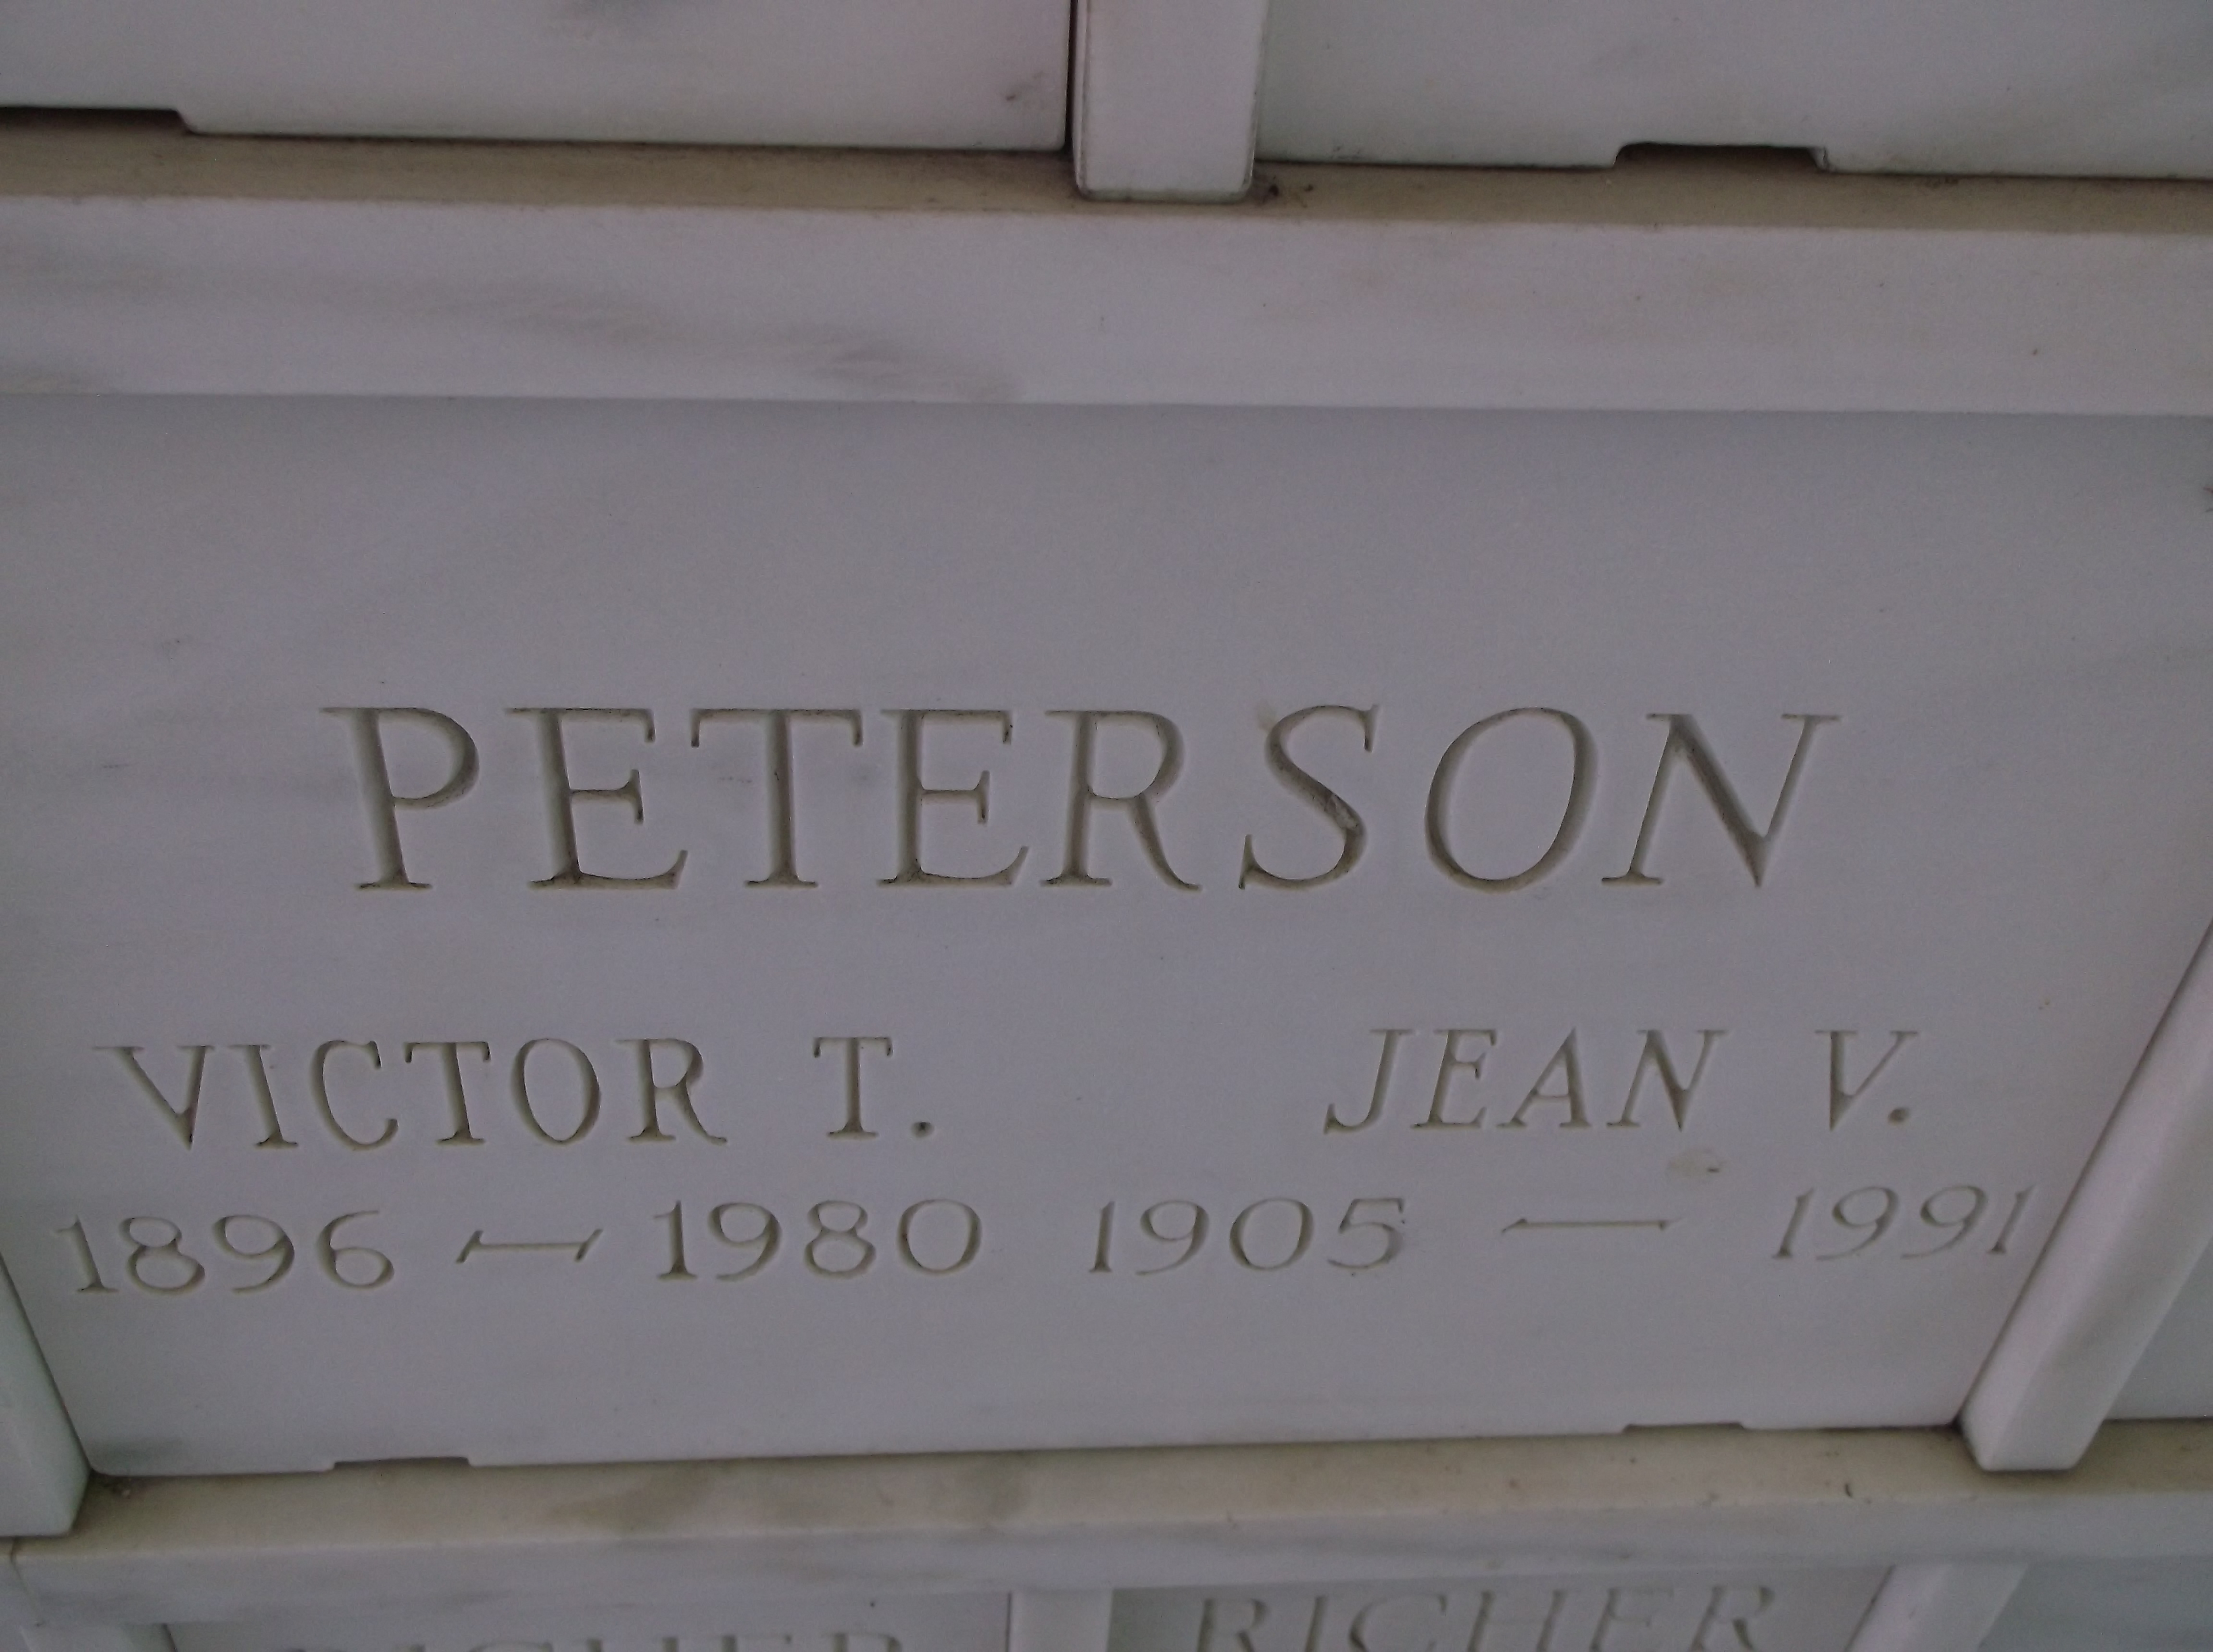 Victor T Peterson